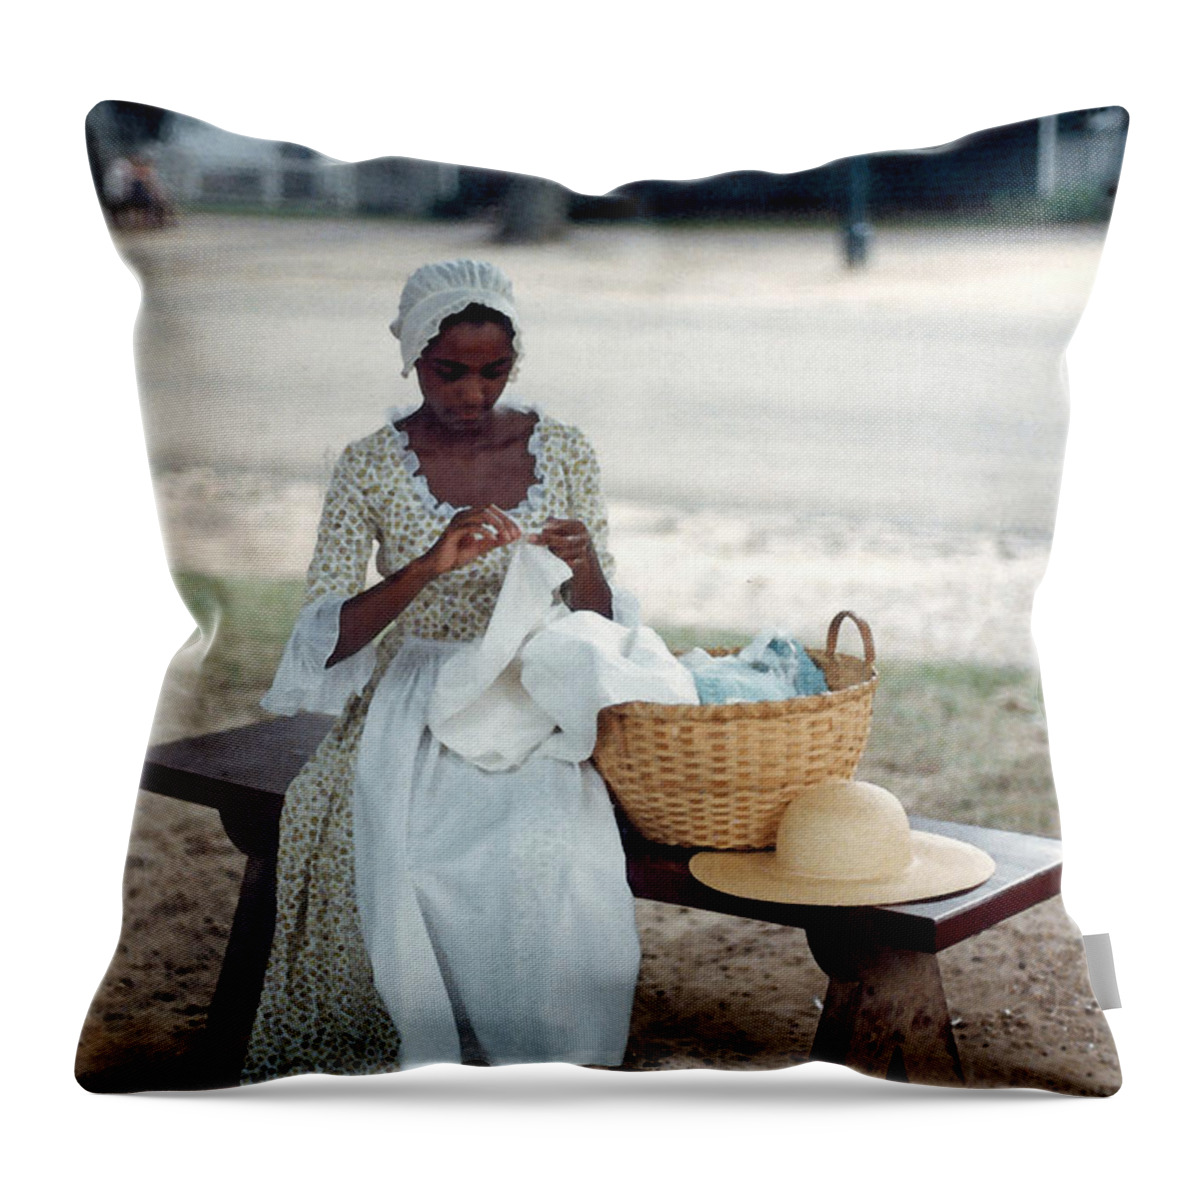 Photograph Throw Pillow featuring the photograph Long Time Ago by Suzanne Gaff